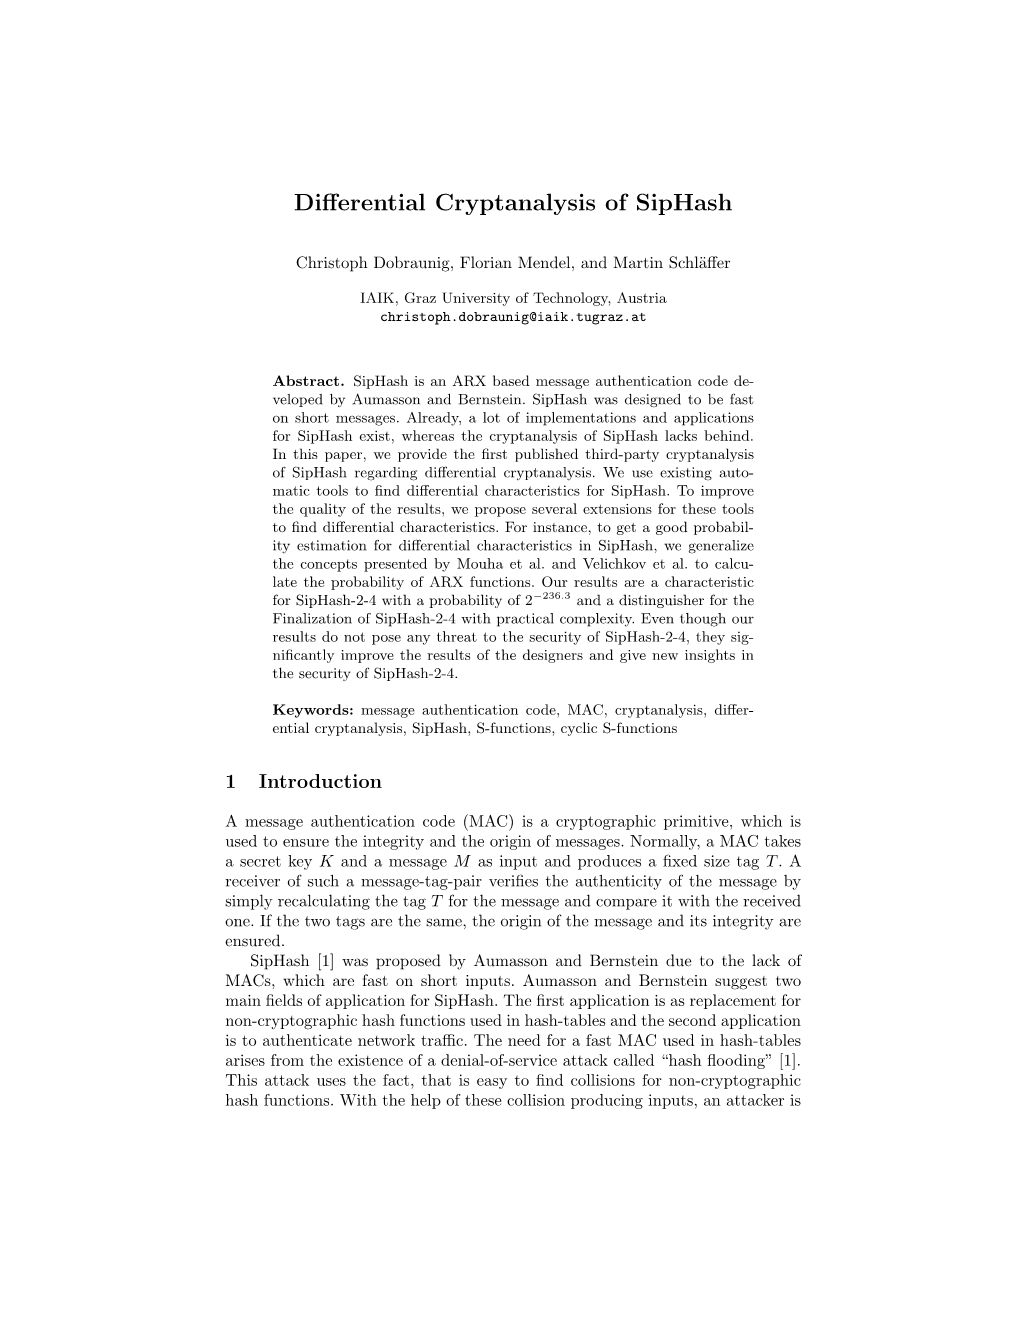 Differential Cryptanalysis of Siphash